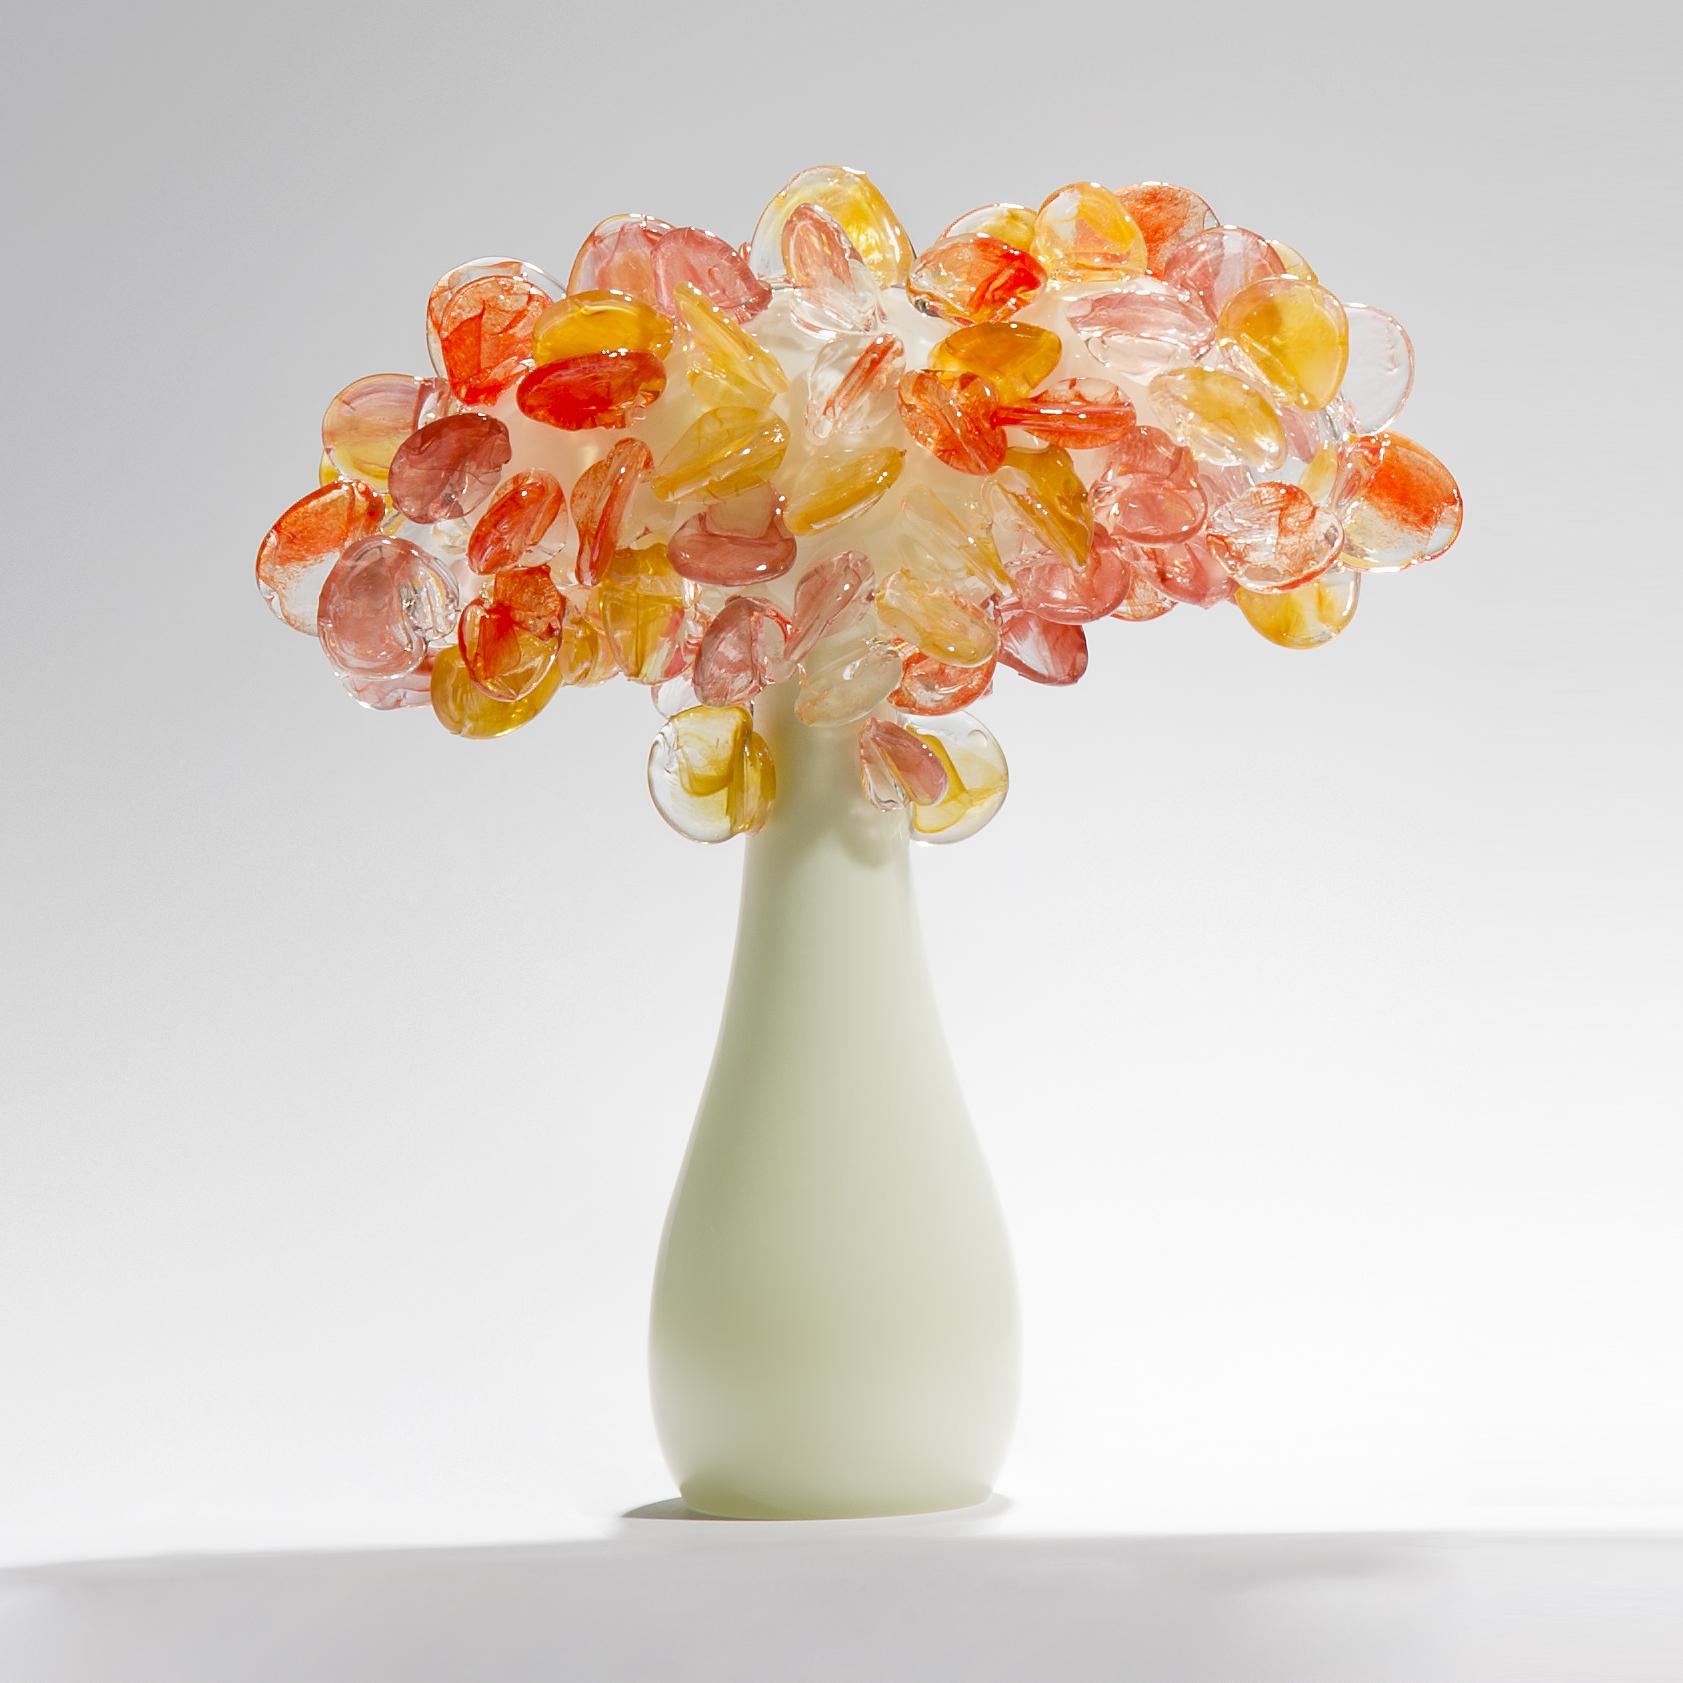 Enchanted dusk in short coral, is a unique glass tree sculpture by the British artist Louis Thompson. The initial tree trunk form has been hand blown in clear and ivory/alabaster colored glass. The top has been covered in free-hand sculpted leaves,